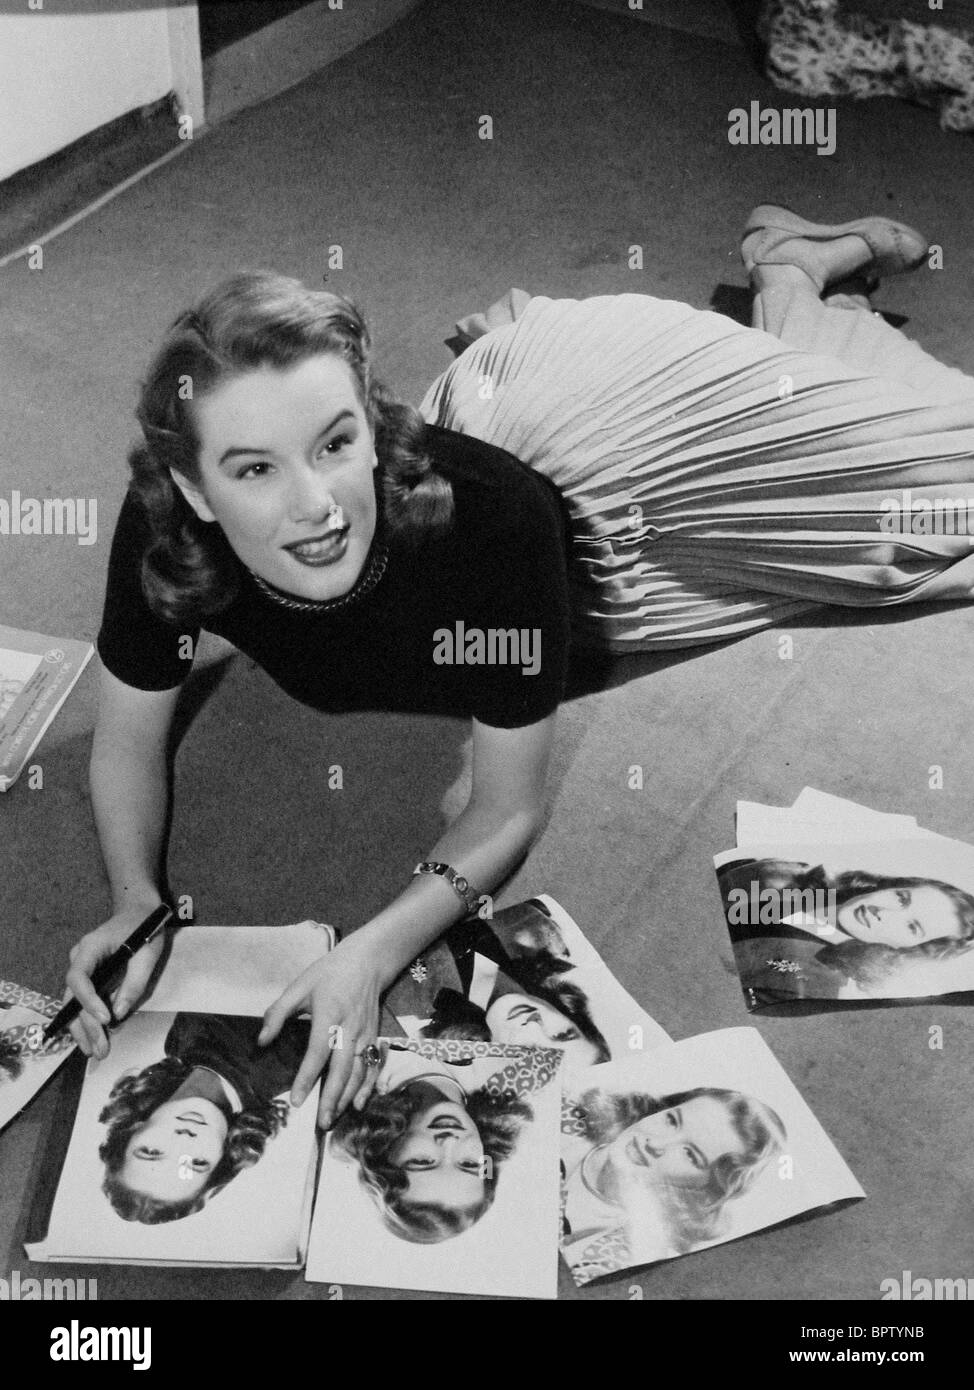 SALLY ANN HOWES ACTRESS (1949) Stock Photo